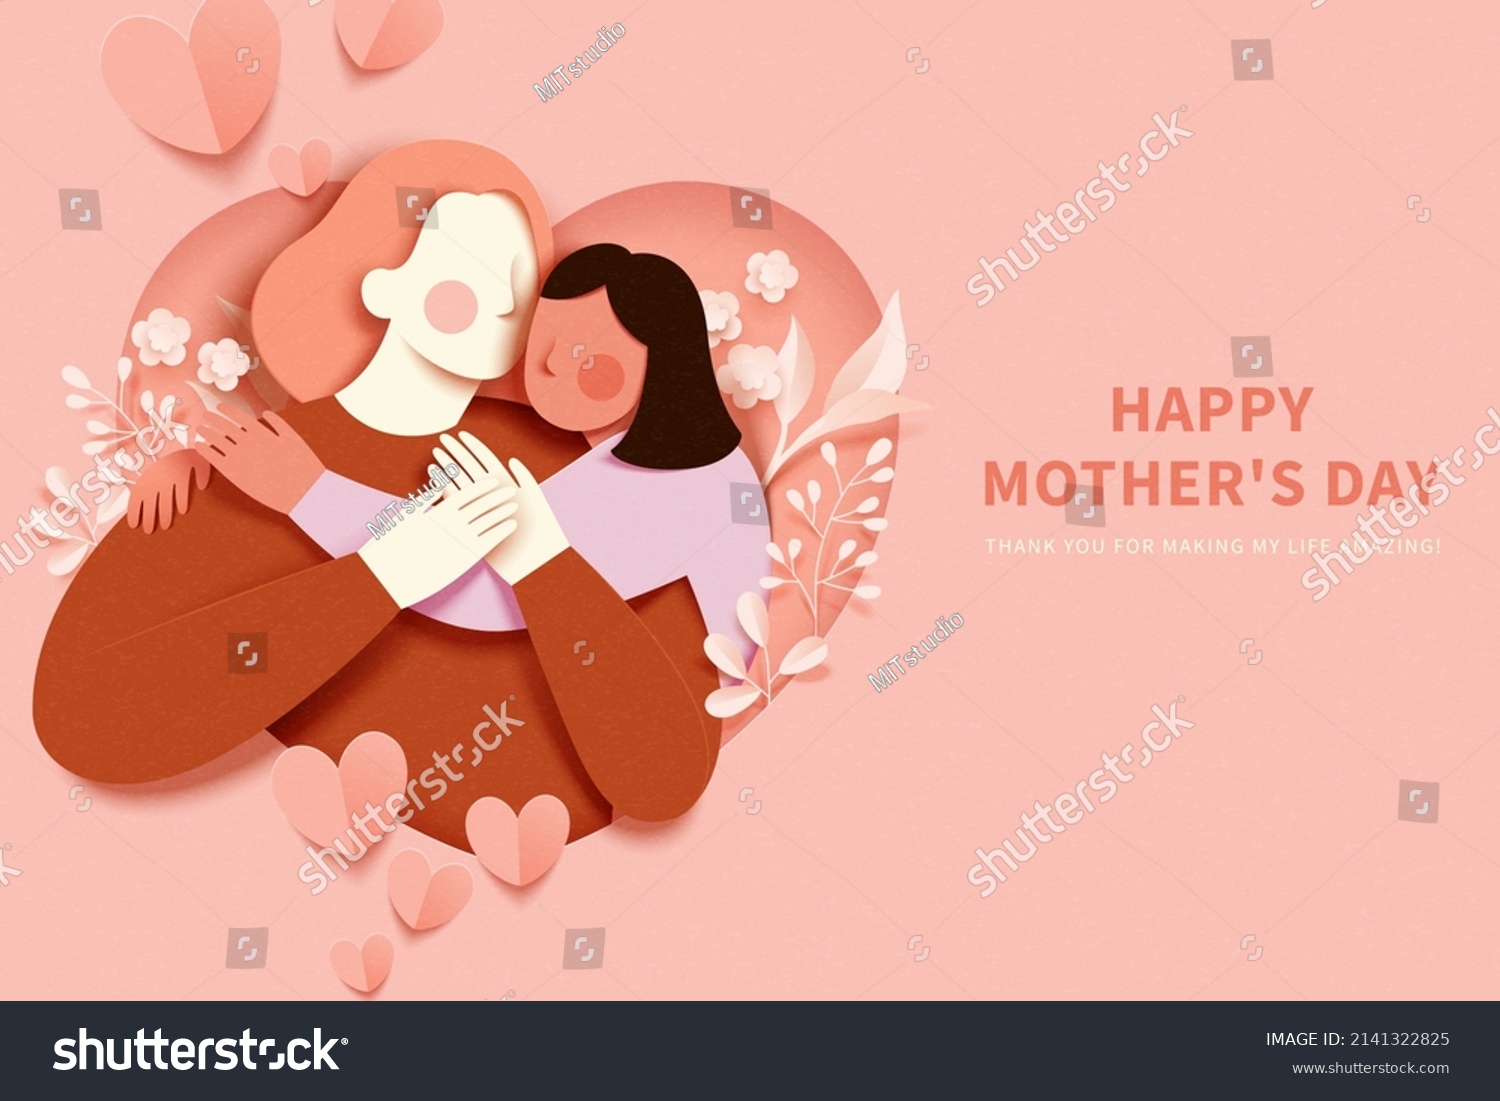 Minimal peach pink Mother's Day template in paper cut design. Young mother is cuddled by daughter. Concept of diverse family. #2141322825